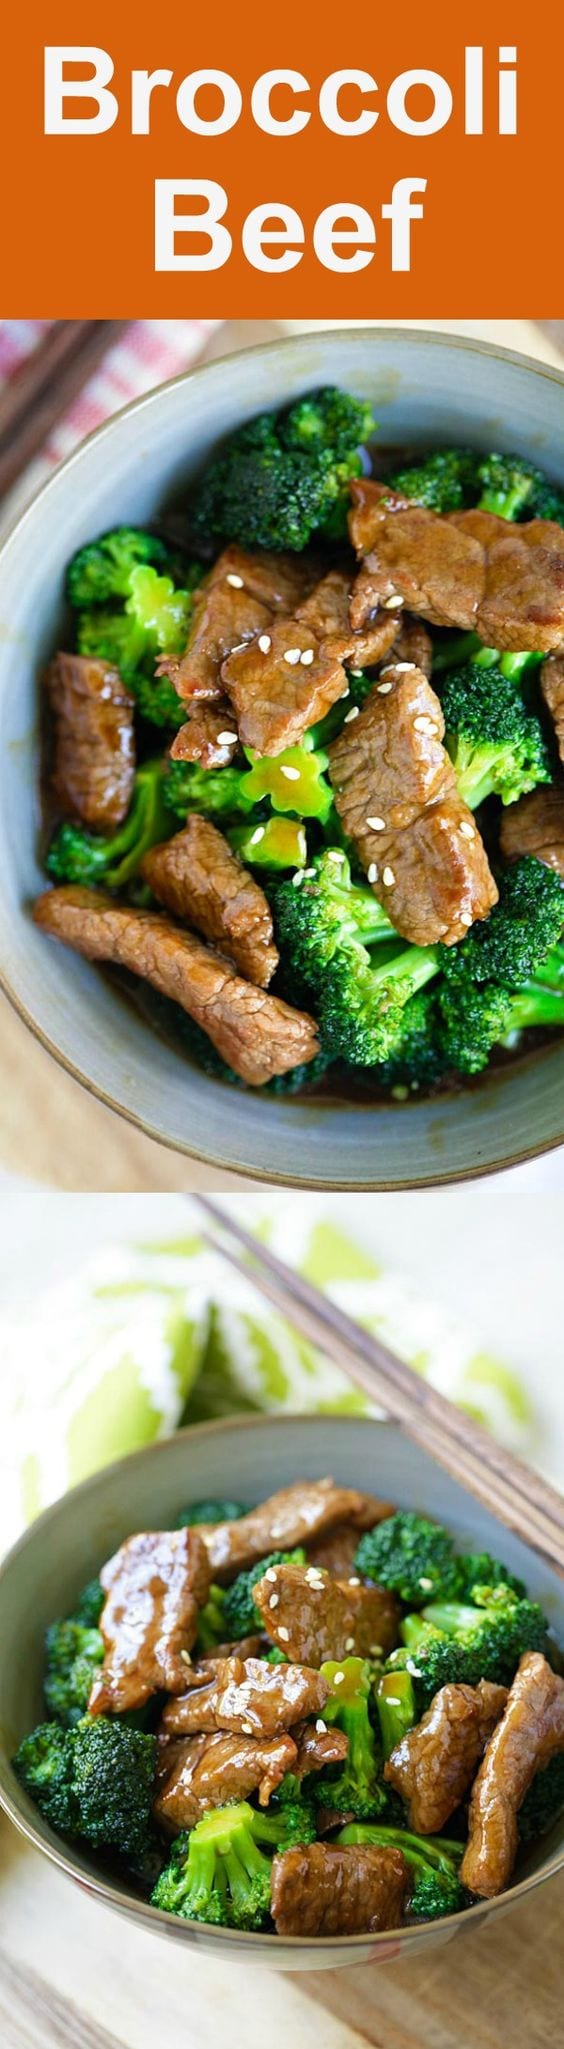 Broccoli Beef - best and easiest homemade beef and broccoli in brown sauce. You'll never need another broccoli beef takeout | rasamalaysia.com